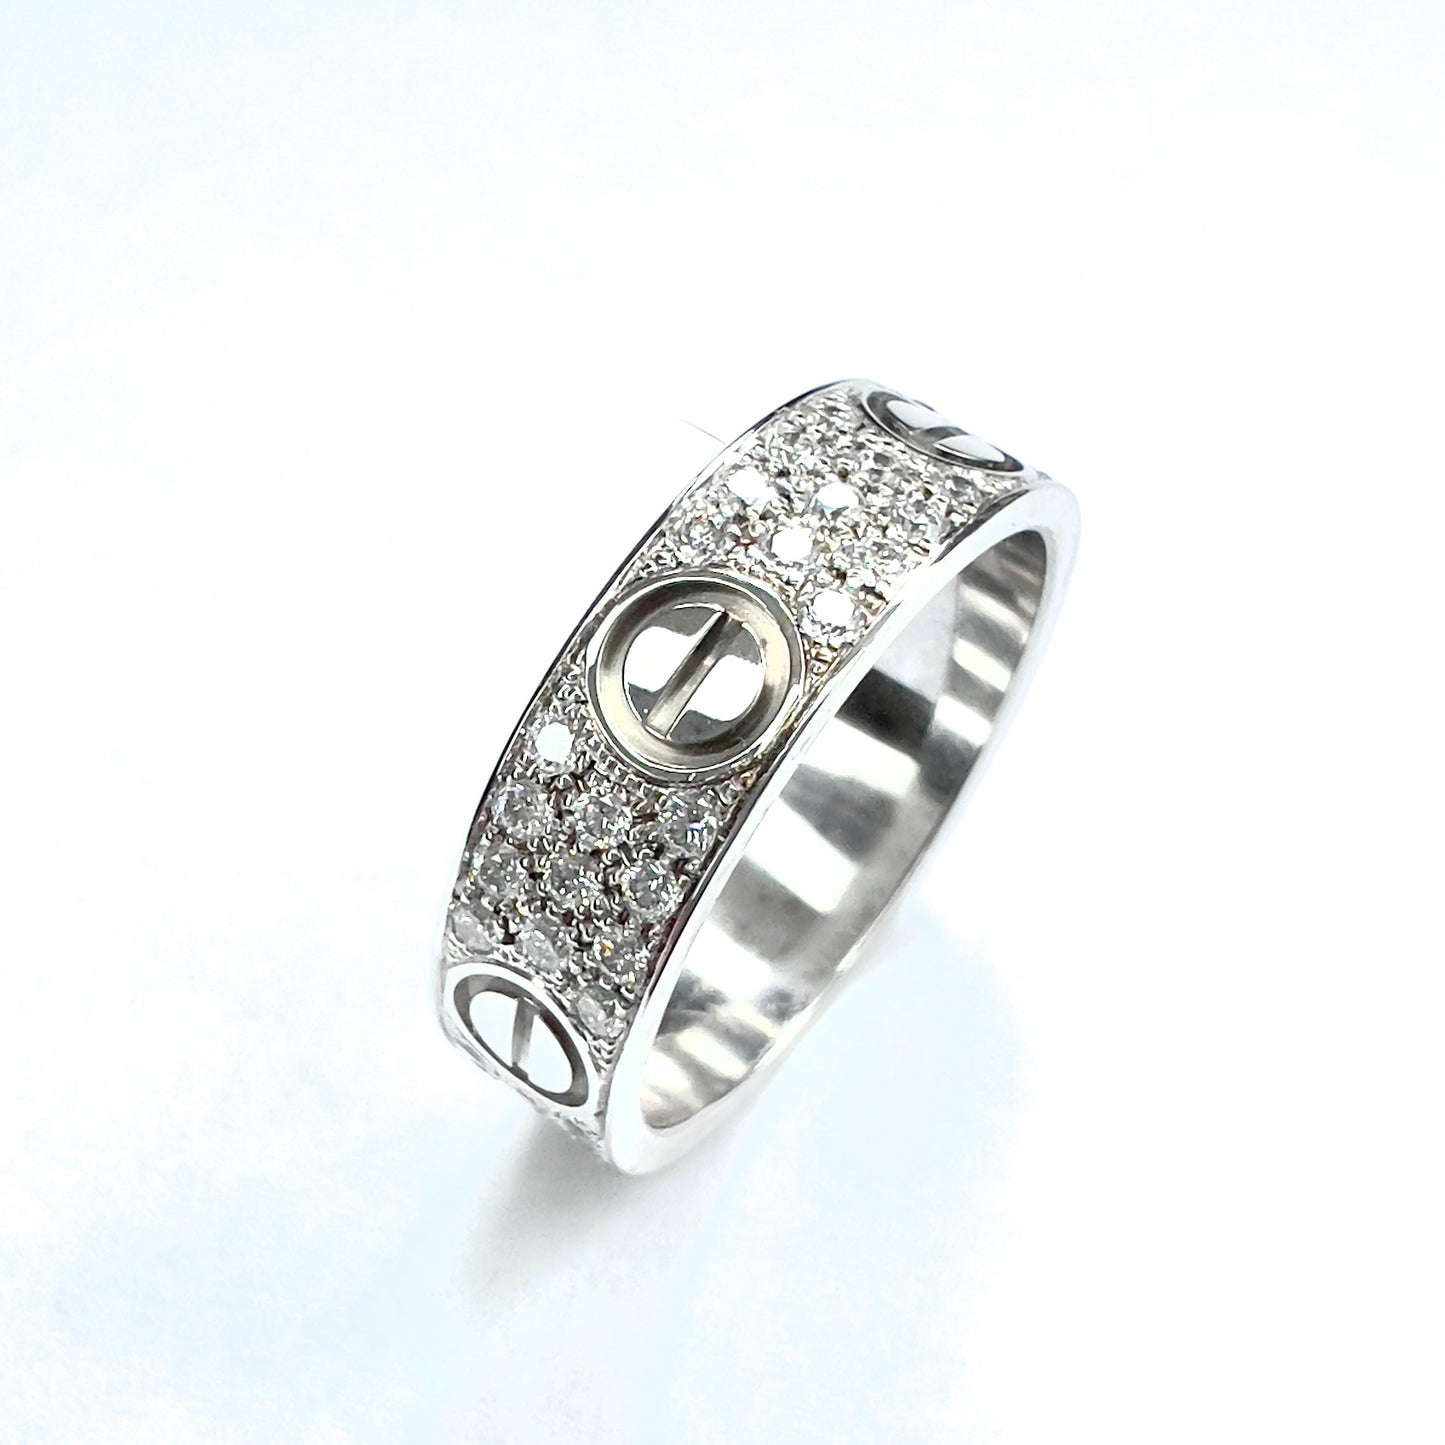 New CARTIER LOVE Ring 5.5mm 18K White Gold VS Pave Diamonds 0.68TCW